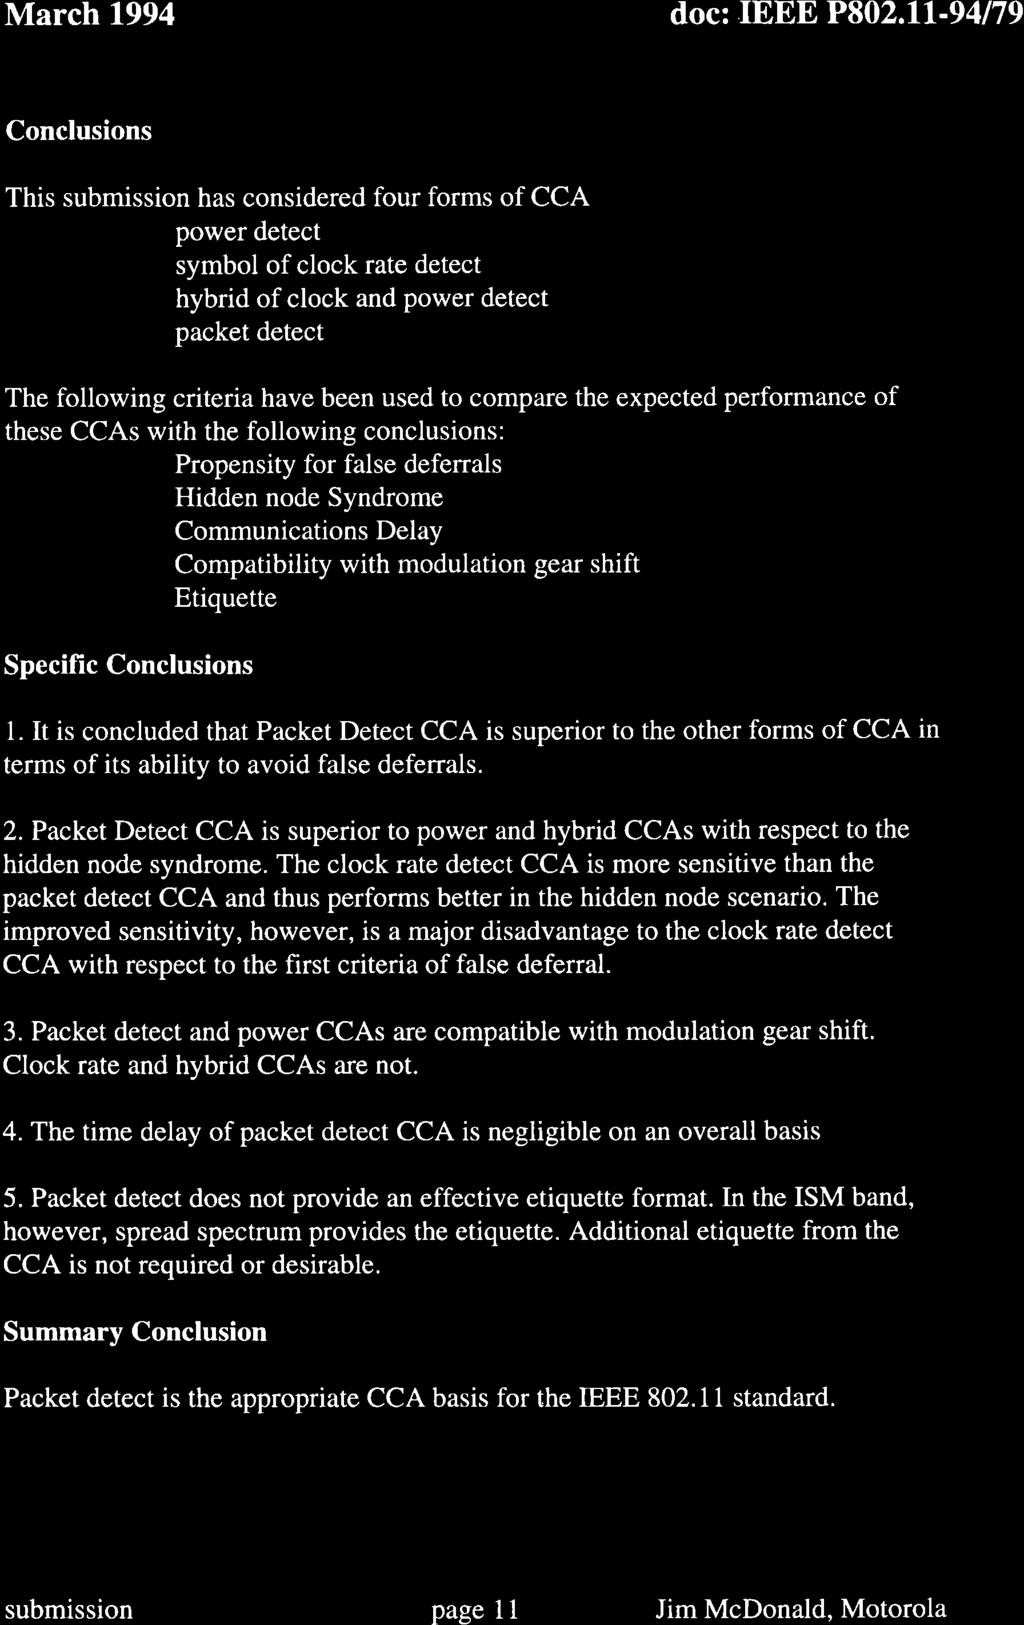 Conclusions This submission has considered four forms of CCA: power detect symbol of clock rate detect hybrid of clock and power detect packet detect The following criteria have been used to compare